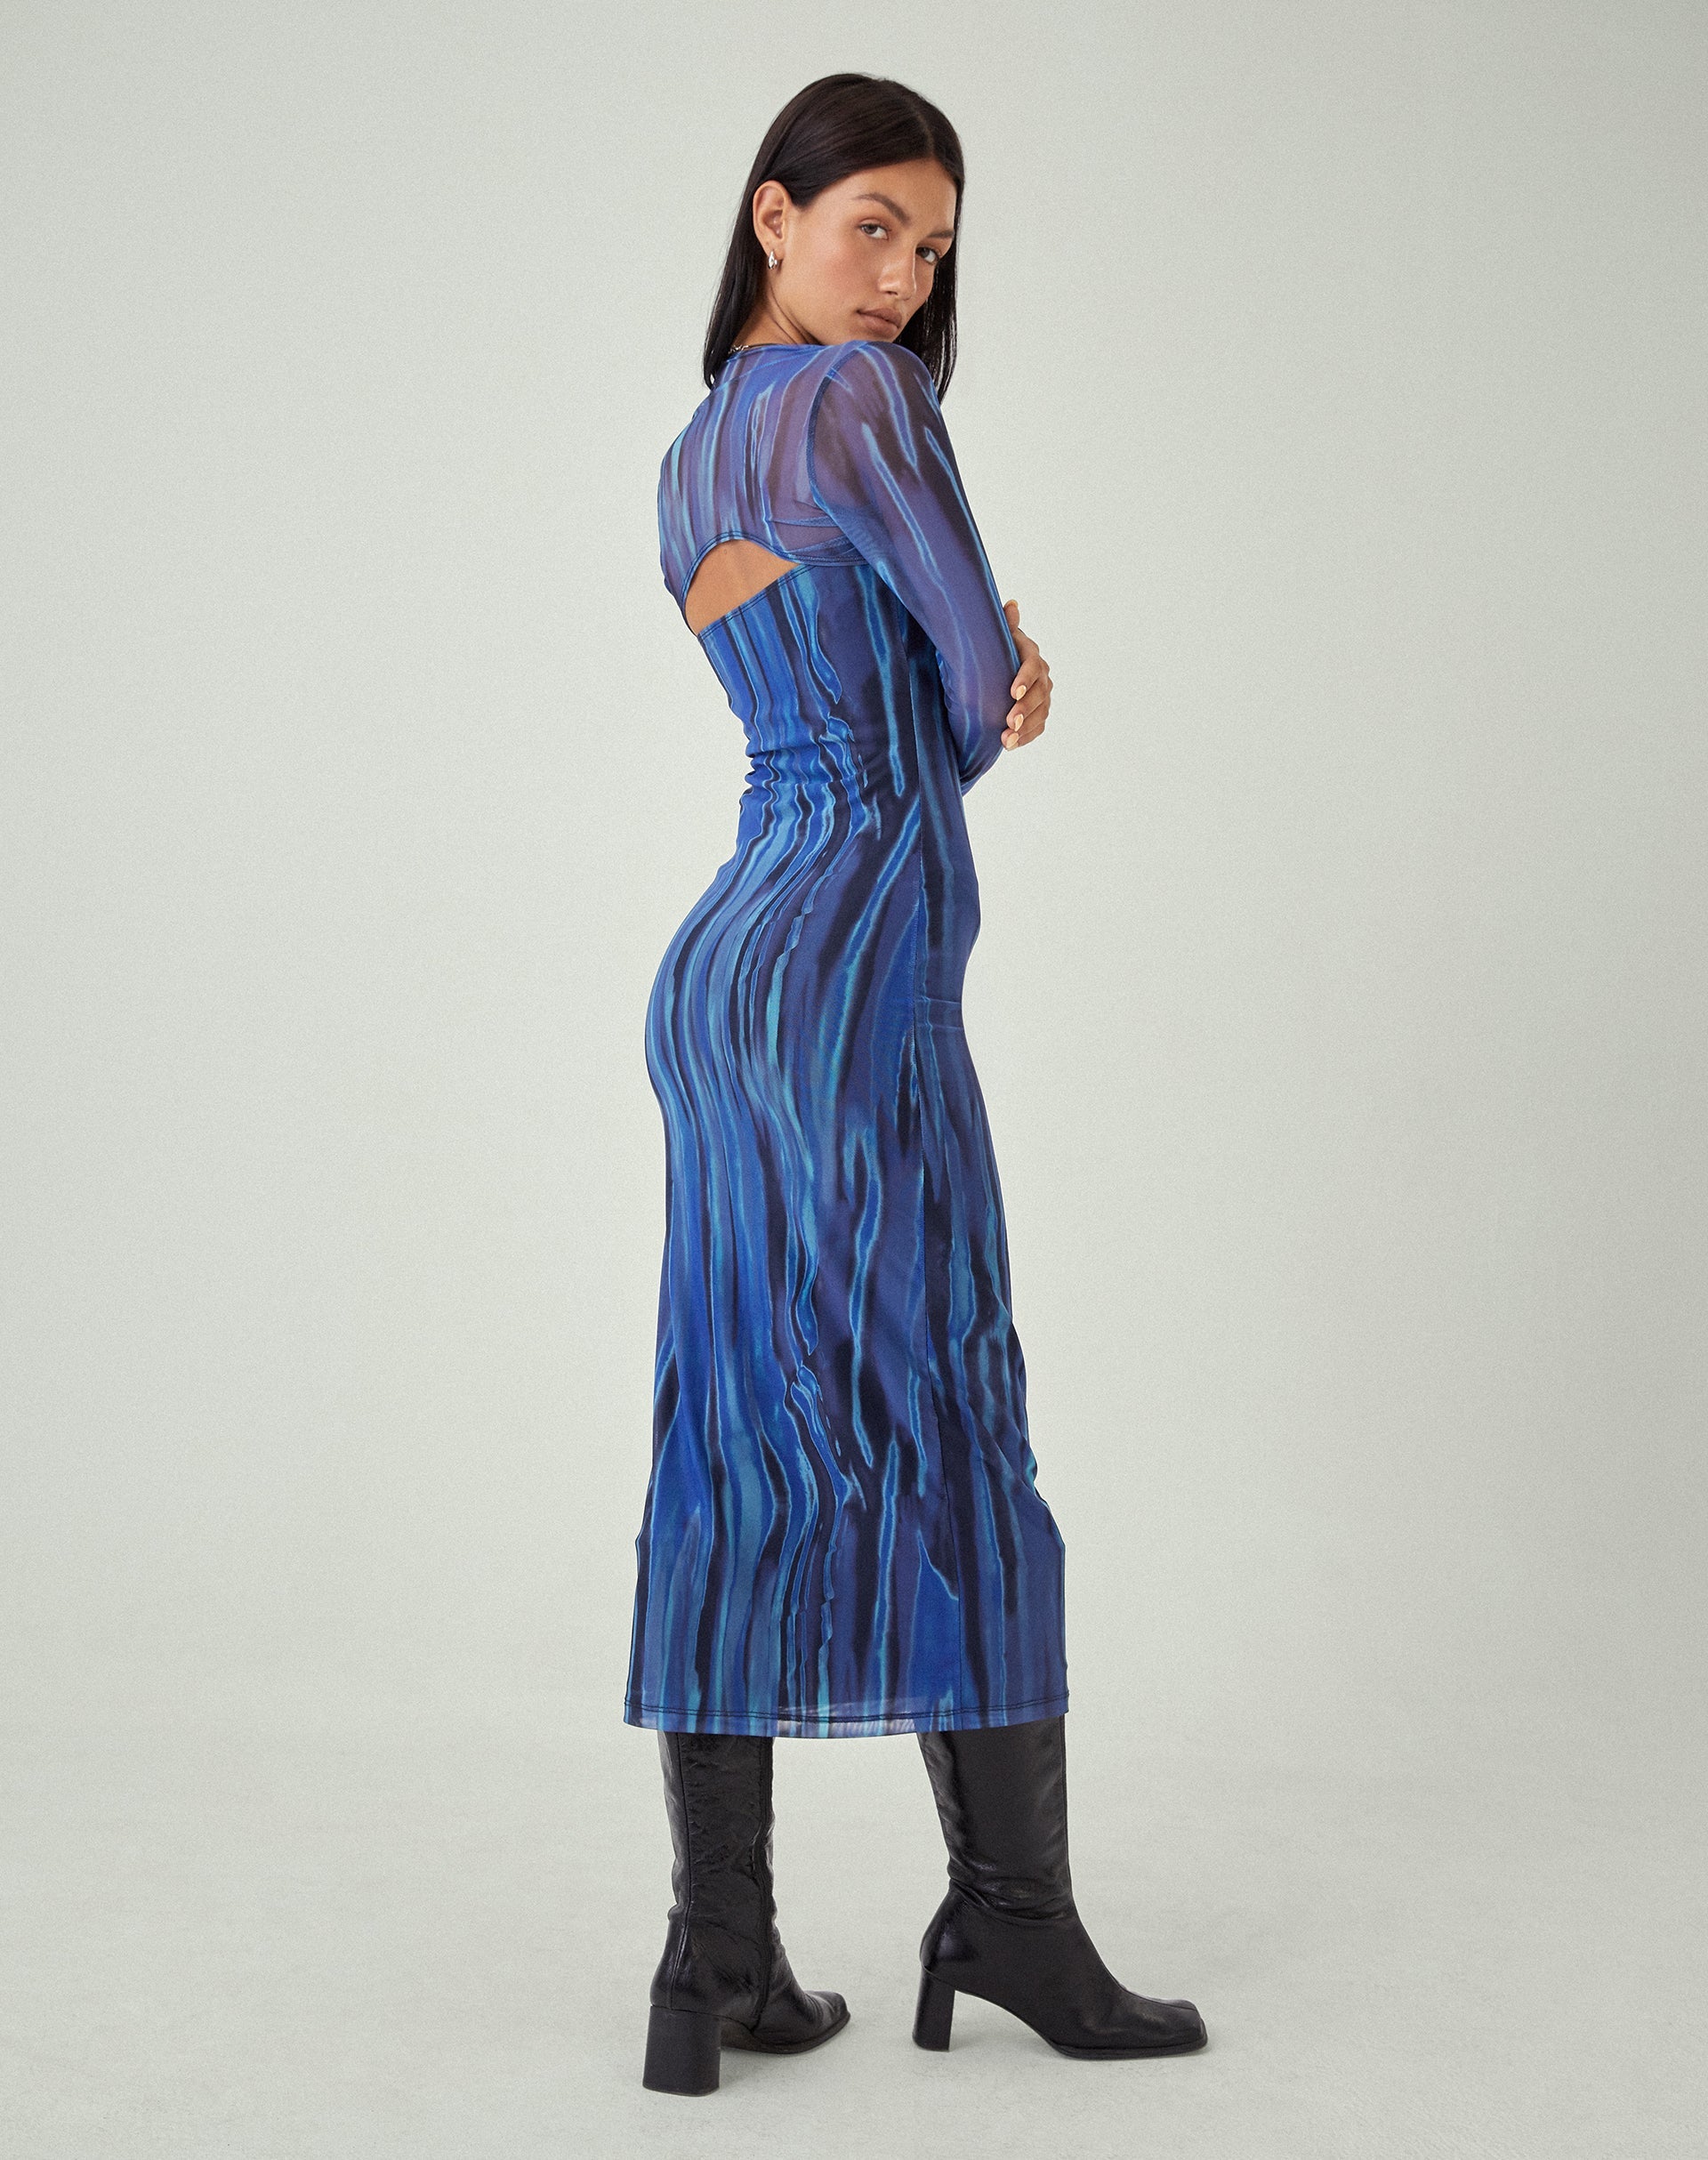 image of MOTEL X JACQUIE Shuro Maxi Dress in Colour Bleed Blue